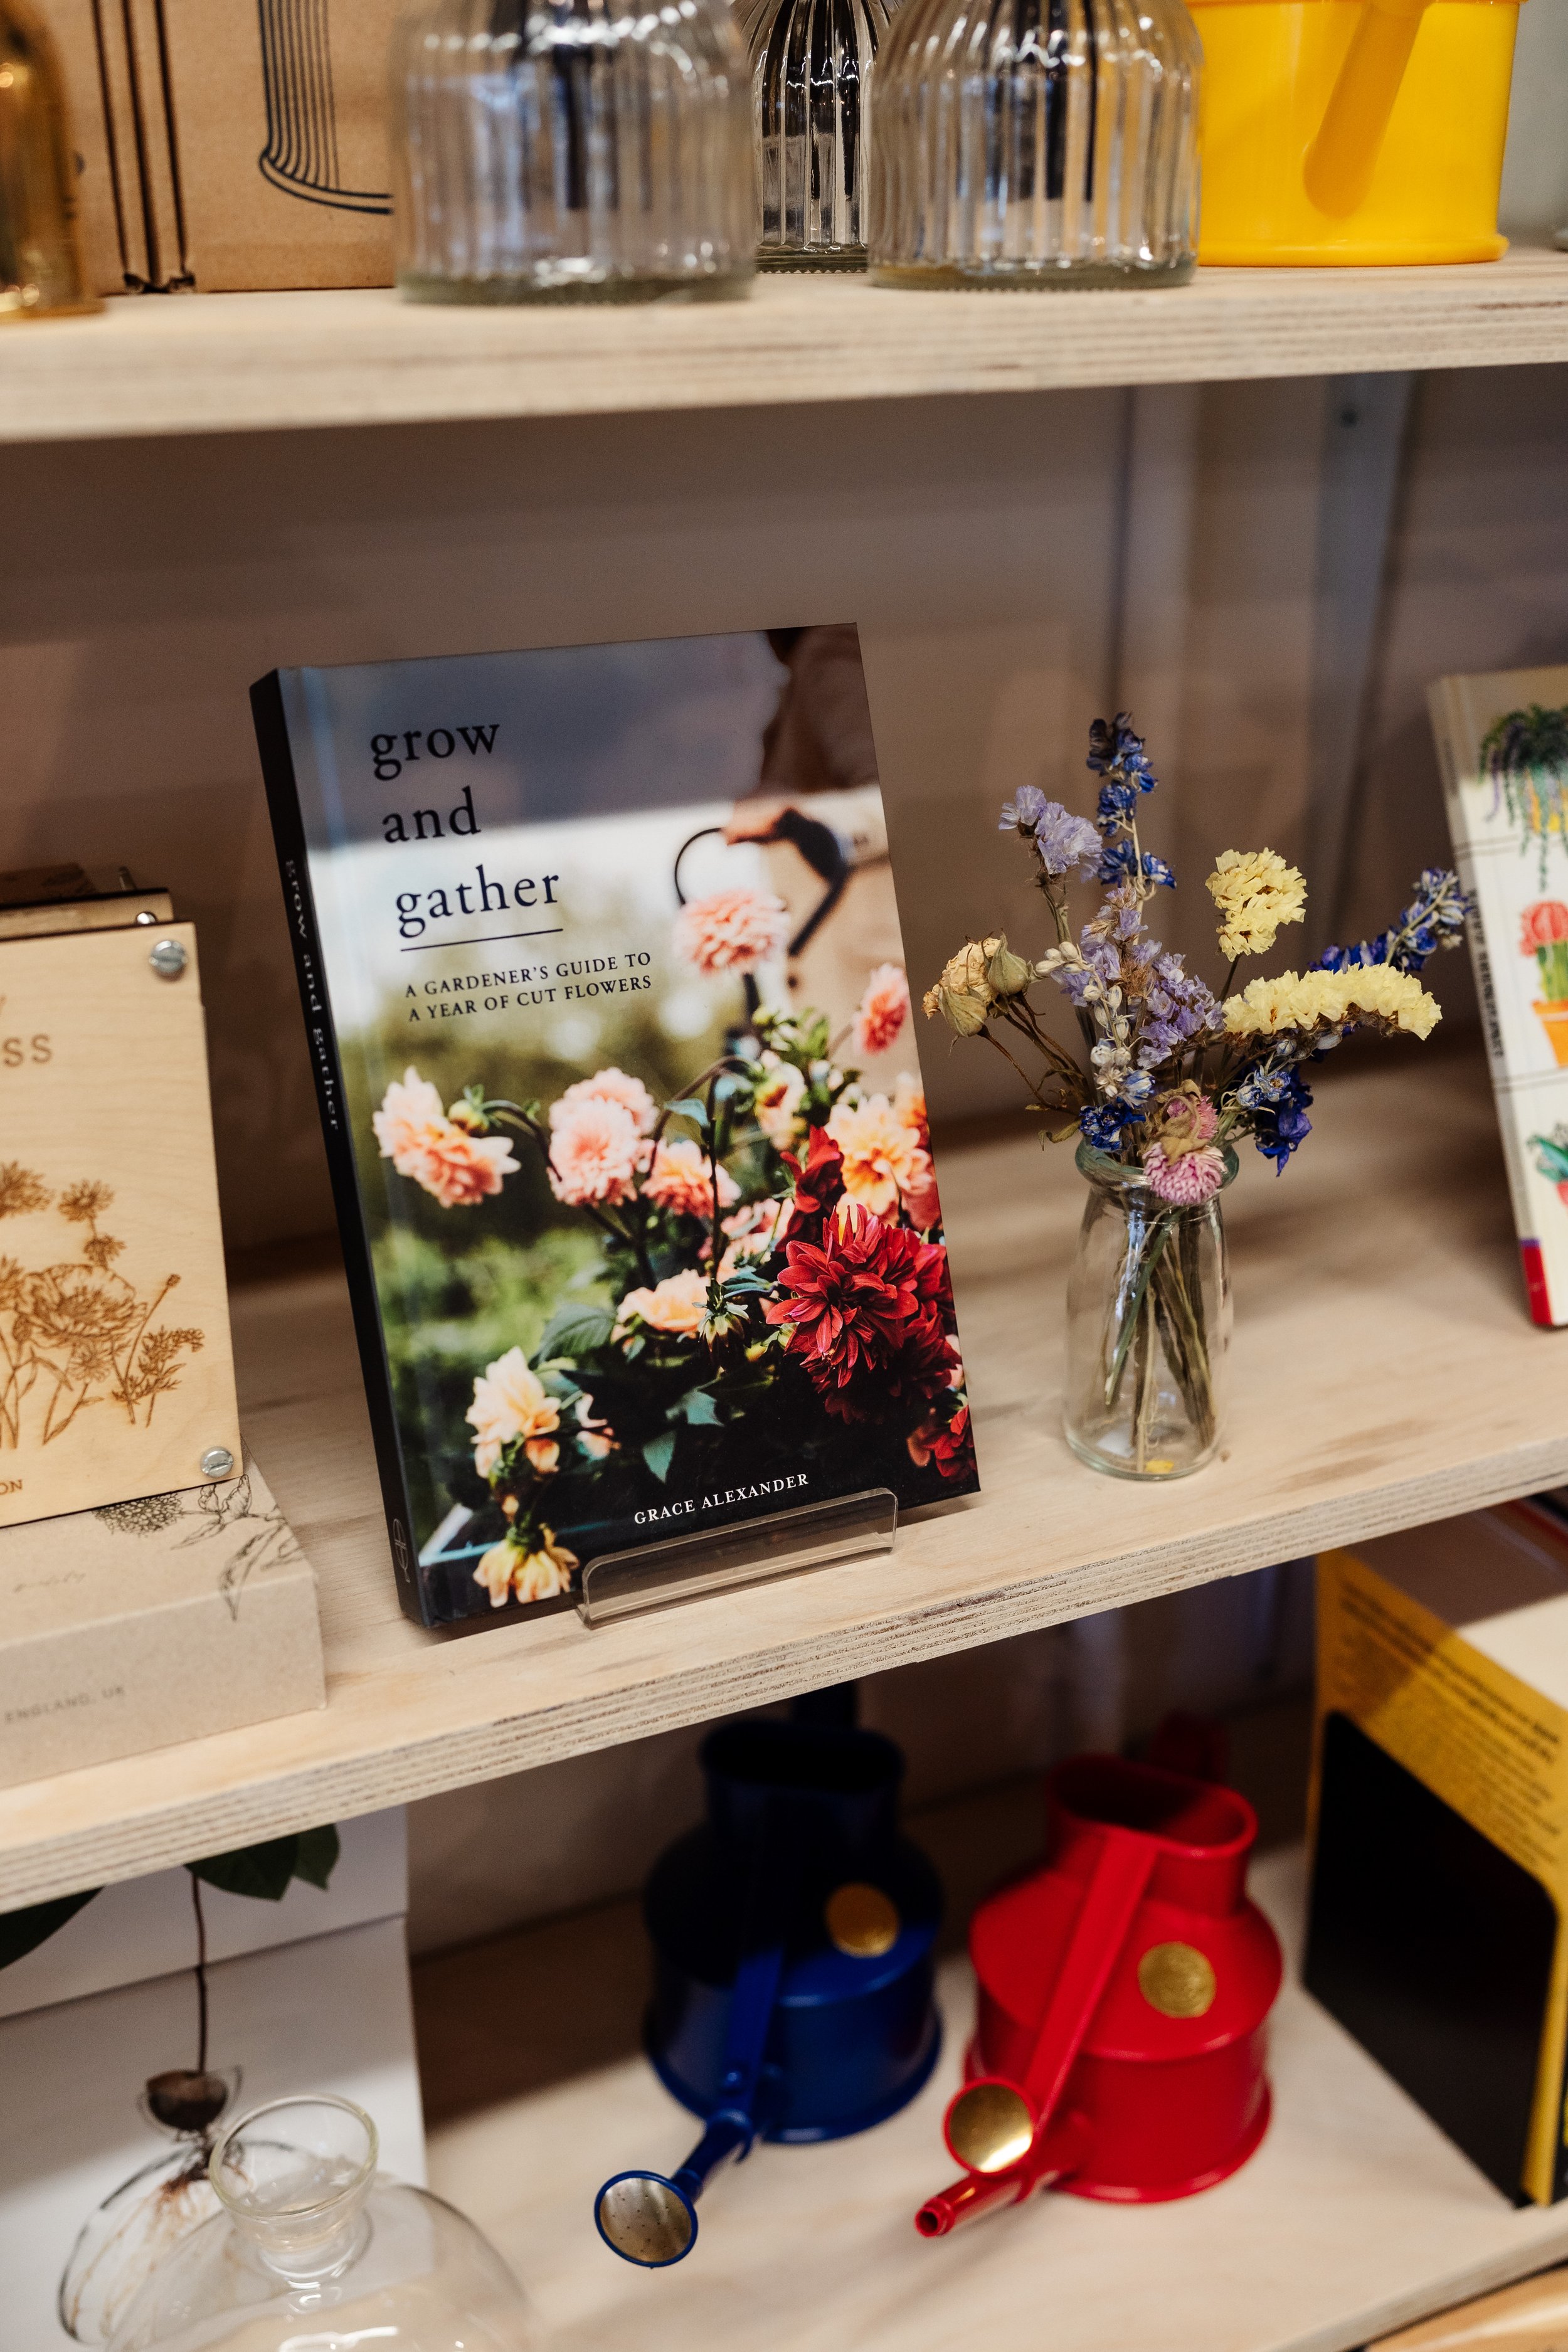 Flower press and grow and gather book inside independent london store The Every Space, Walthamstow